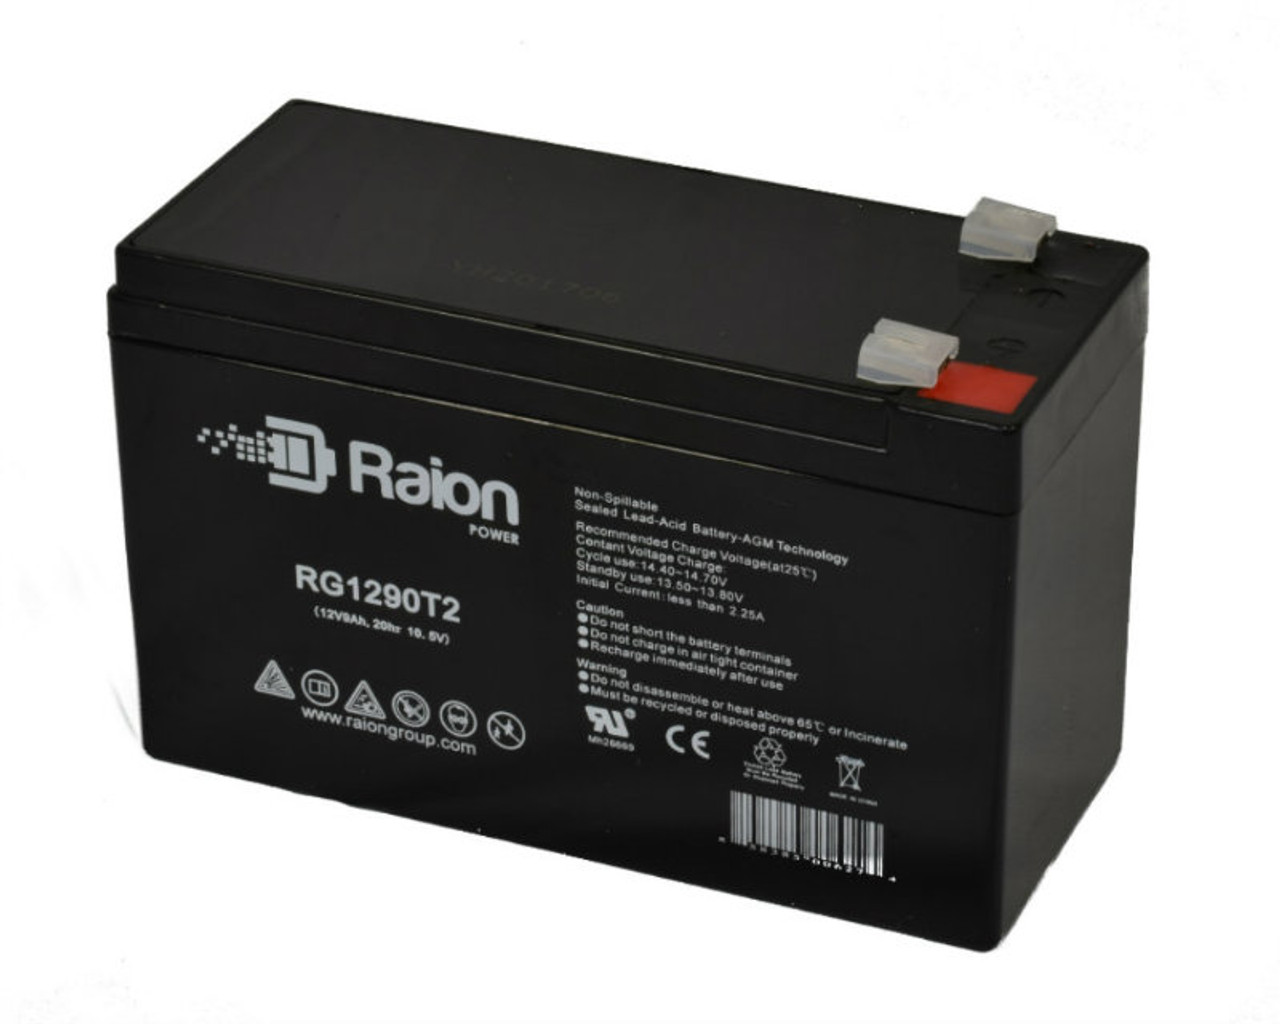 Raion Power RG1290T2 12V 9Ah AGM Battery for CooPower CP12-8.0-F2